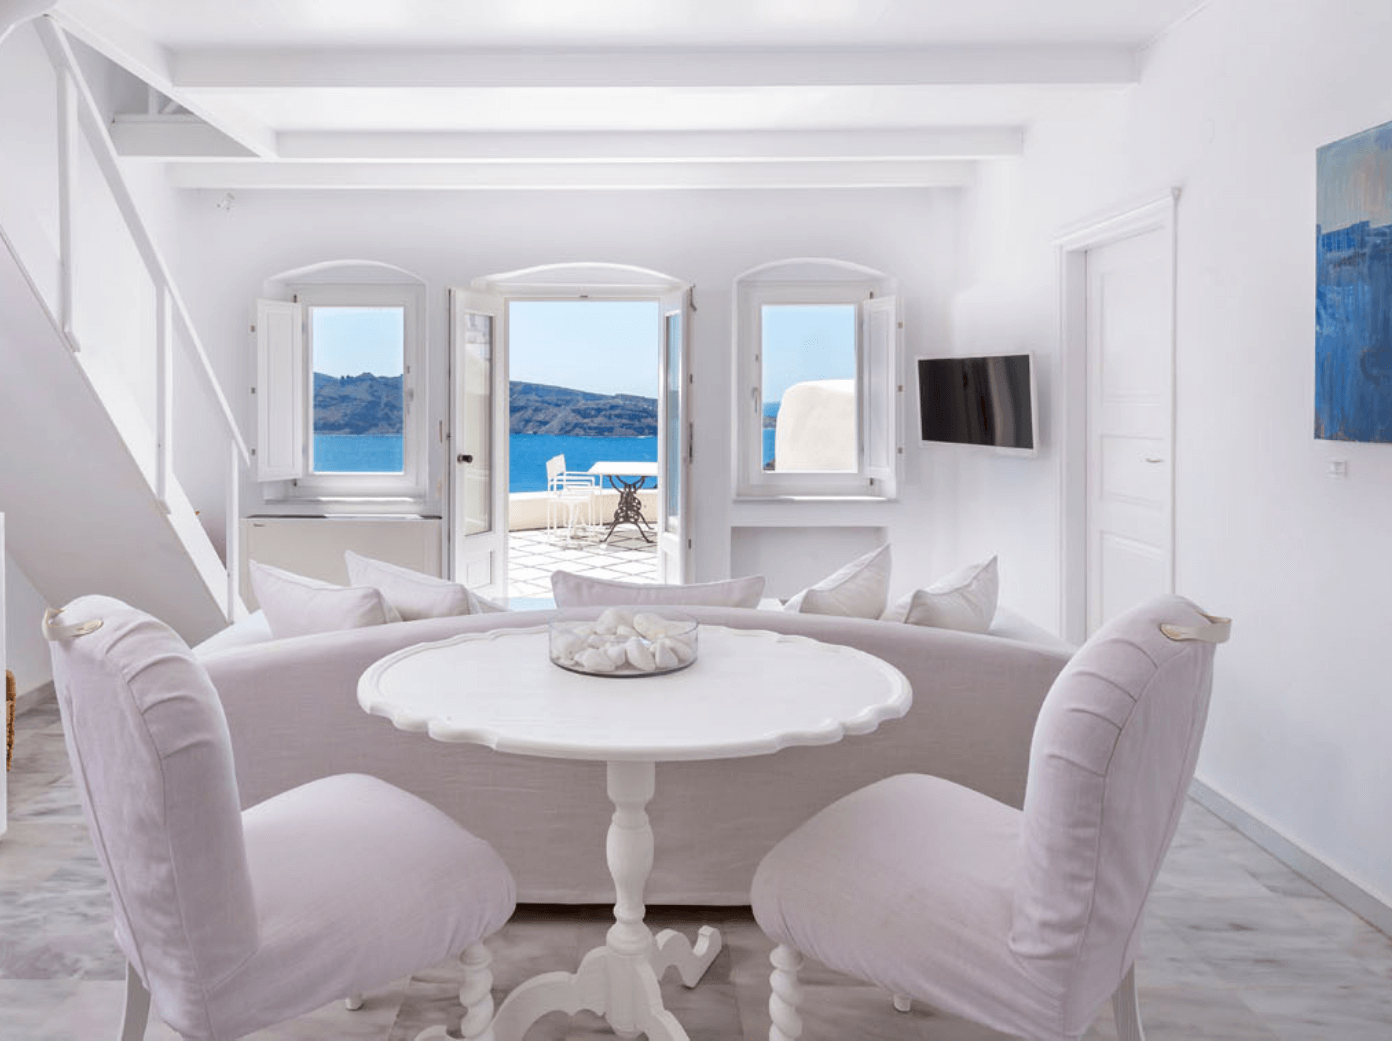 Canaves Oia Suites best luxury hotels in santorini